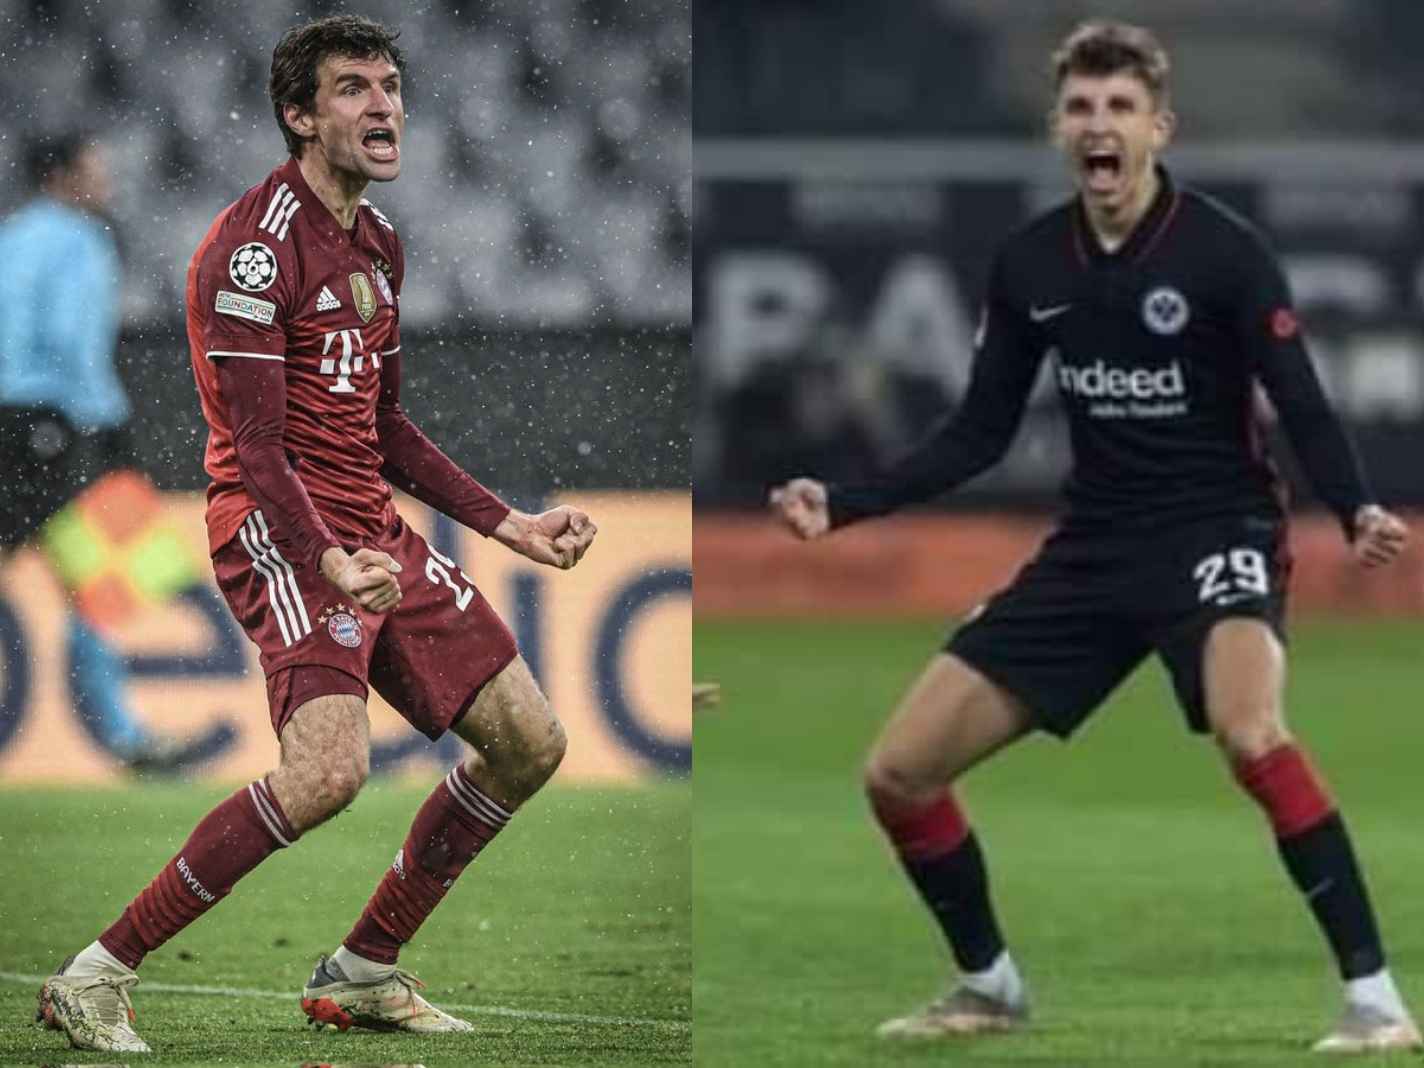 There's a Thomas Muller regen playing at Eintracht Frankfurt